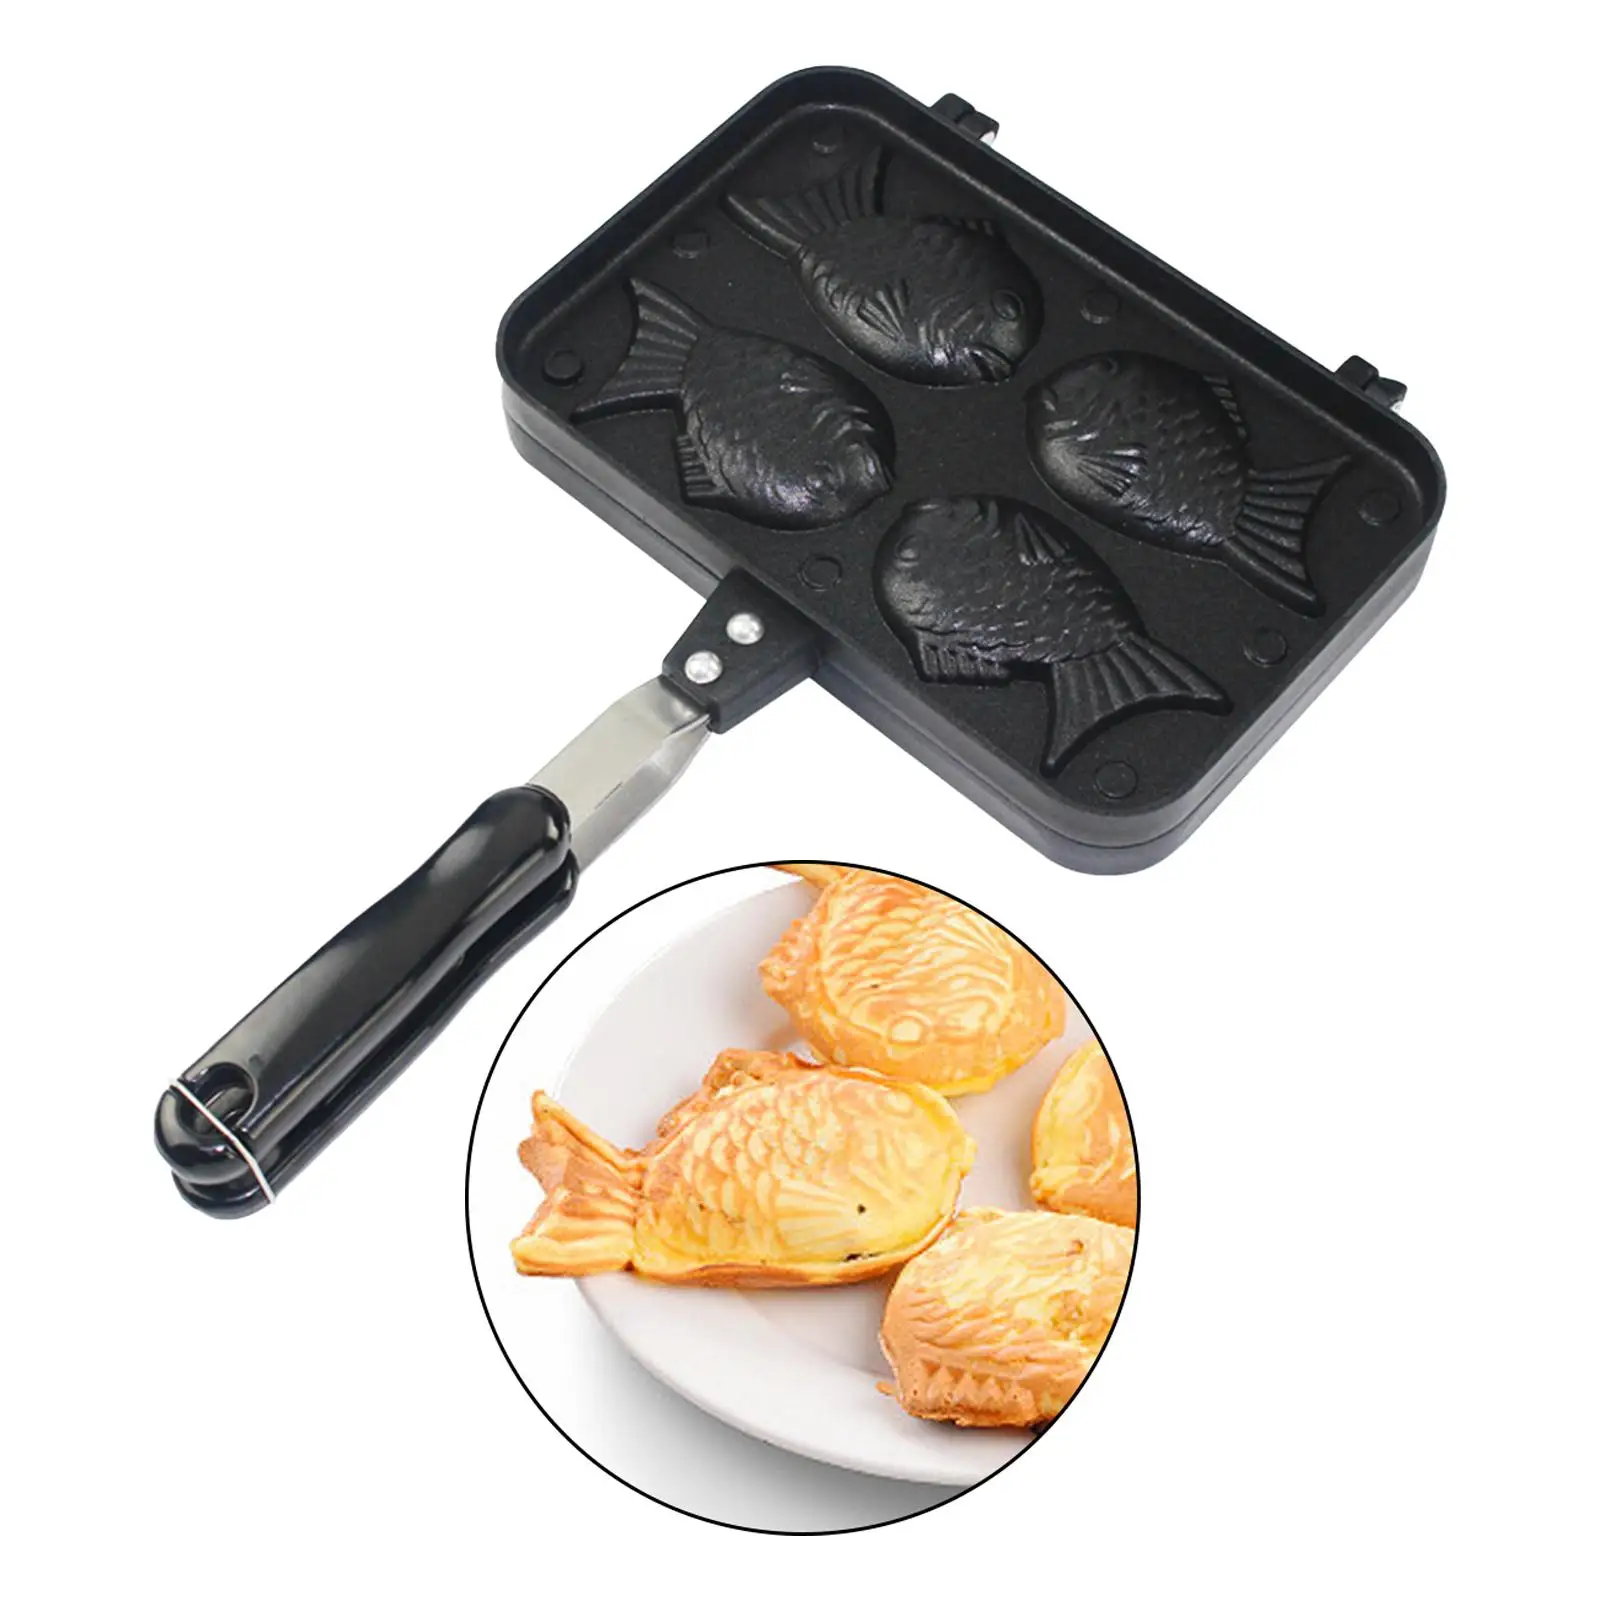 Household Taiyaki Bakeware Smooth Kitchen Gadgets Baking Maker Easy to Clean Double Sided Baking Tray Waffle Baking Pan for Home